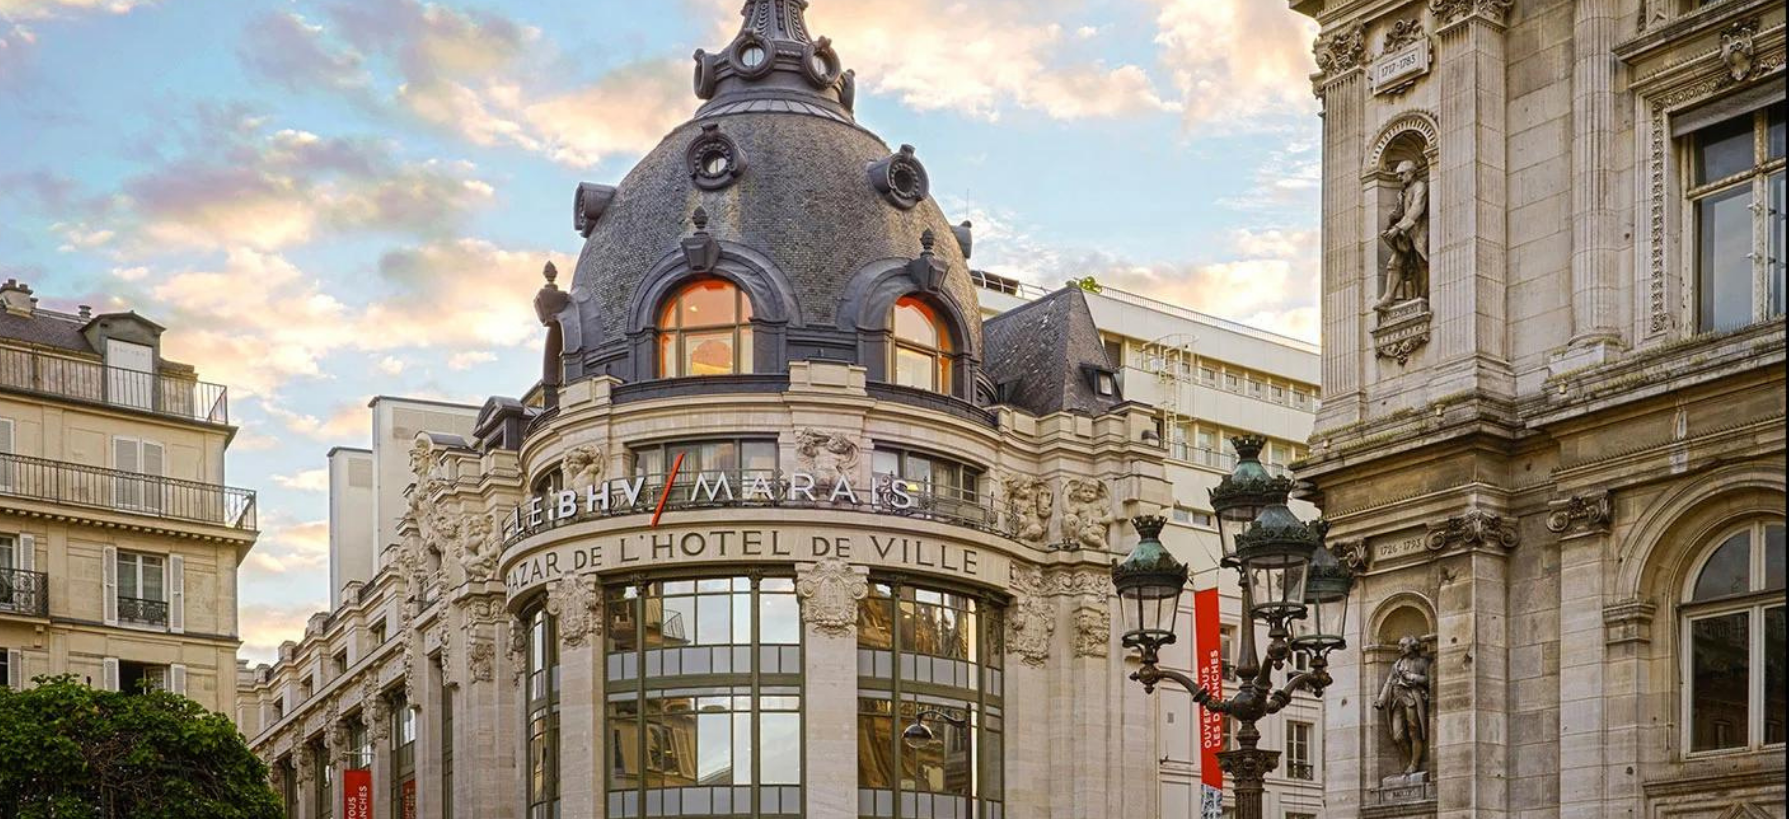 Galeries Lafayette Sells Its BHV Marais Department Store in Paris to Focus On Developing Its Core Brands